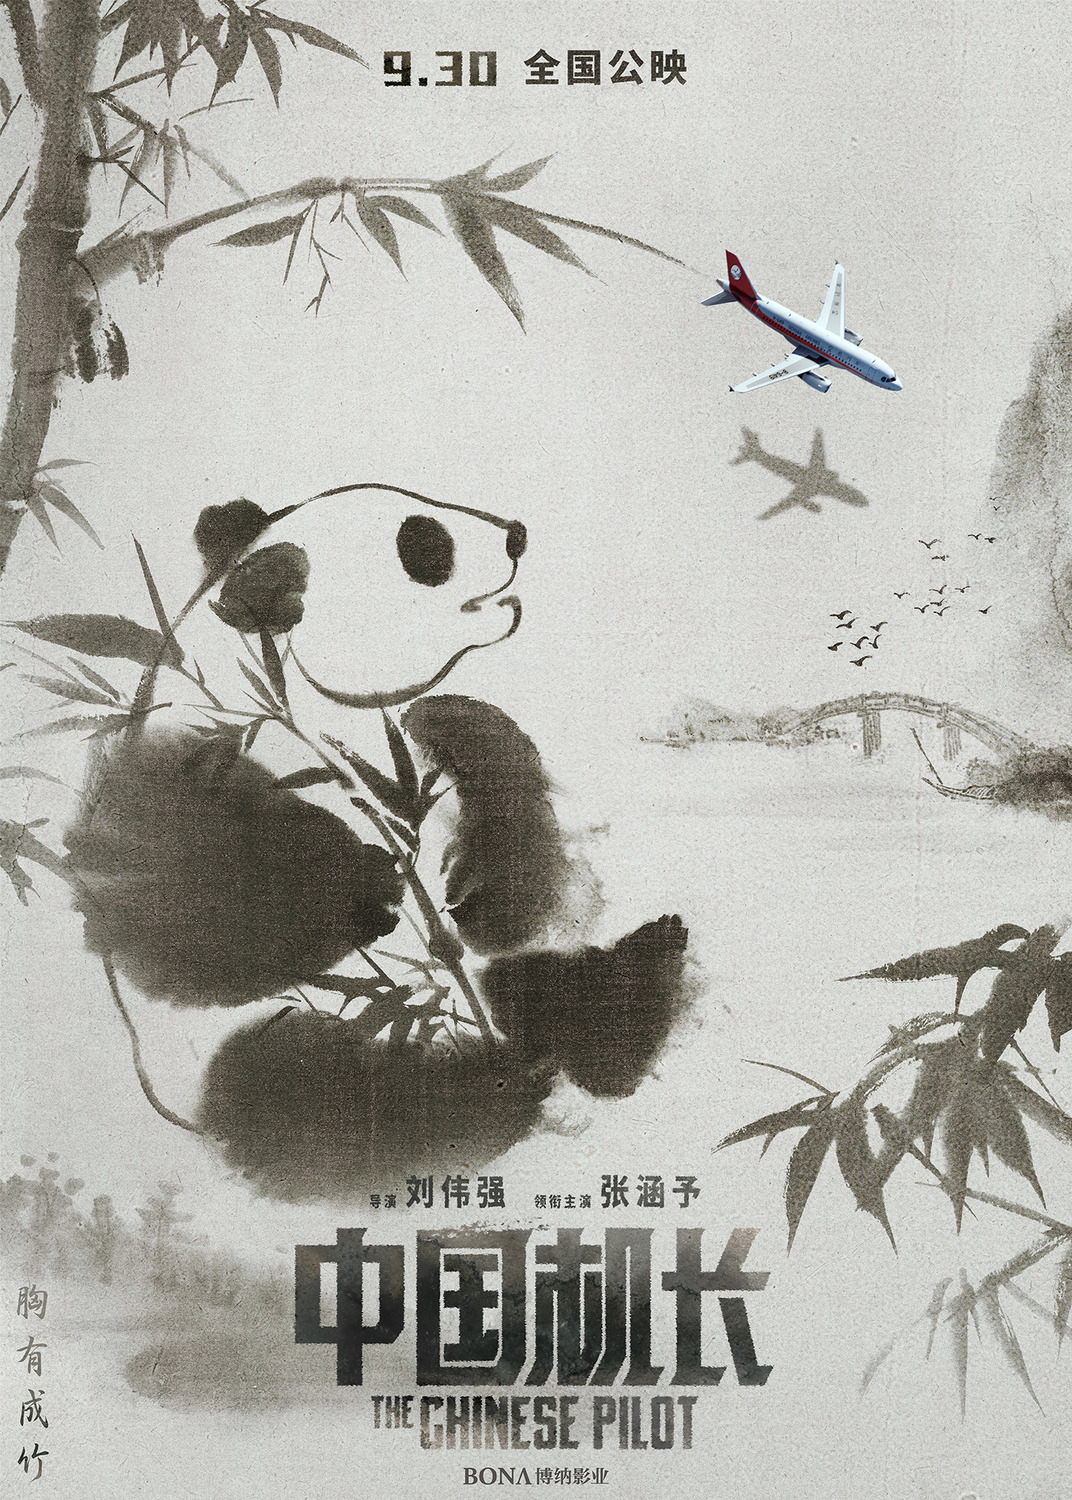 Extra Large Movie Poster Image for The Chinese Pilot (#13 of 17)